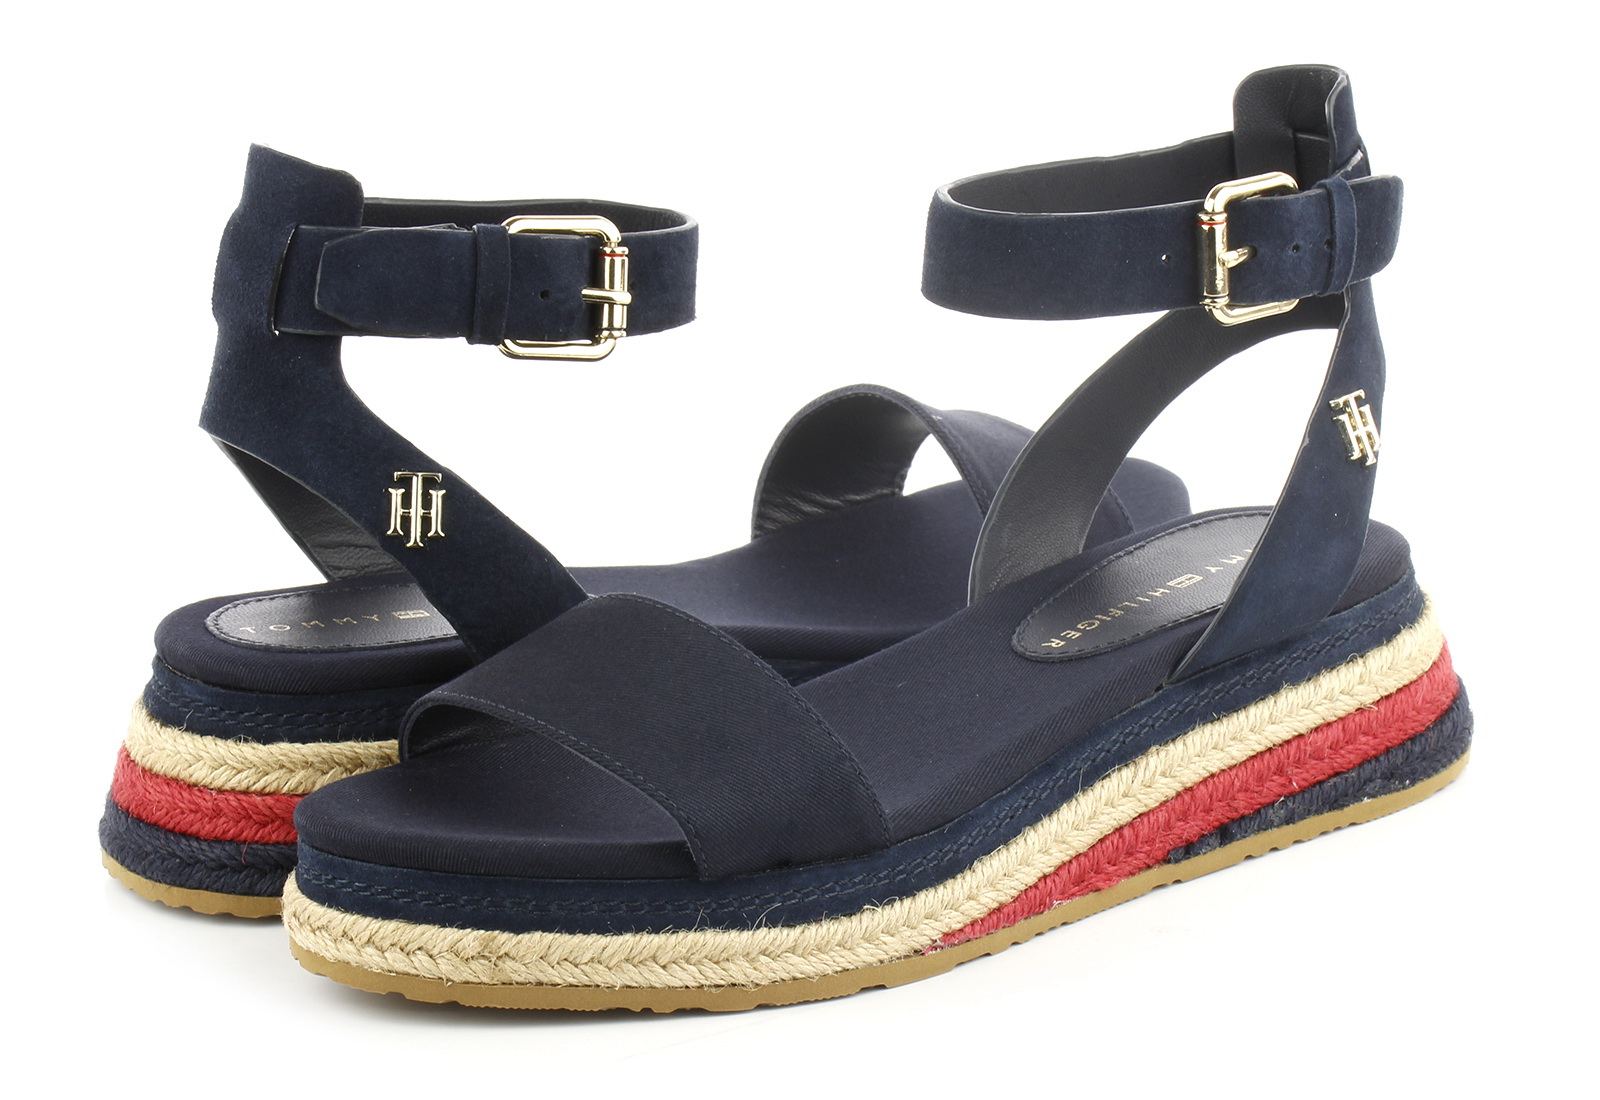 Tommy Hilfiger Sandals - Heidi 1d - FW0-6233-DW5 - Online shop for sneakers, shoes and